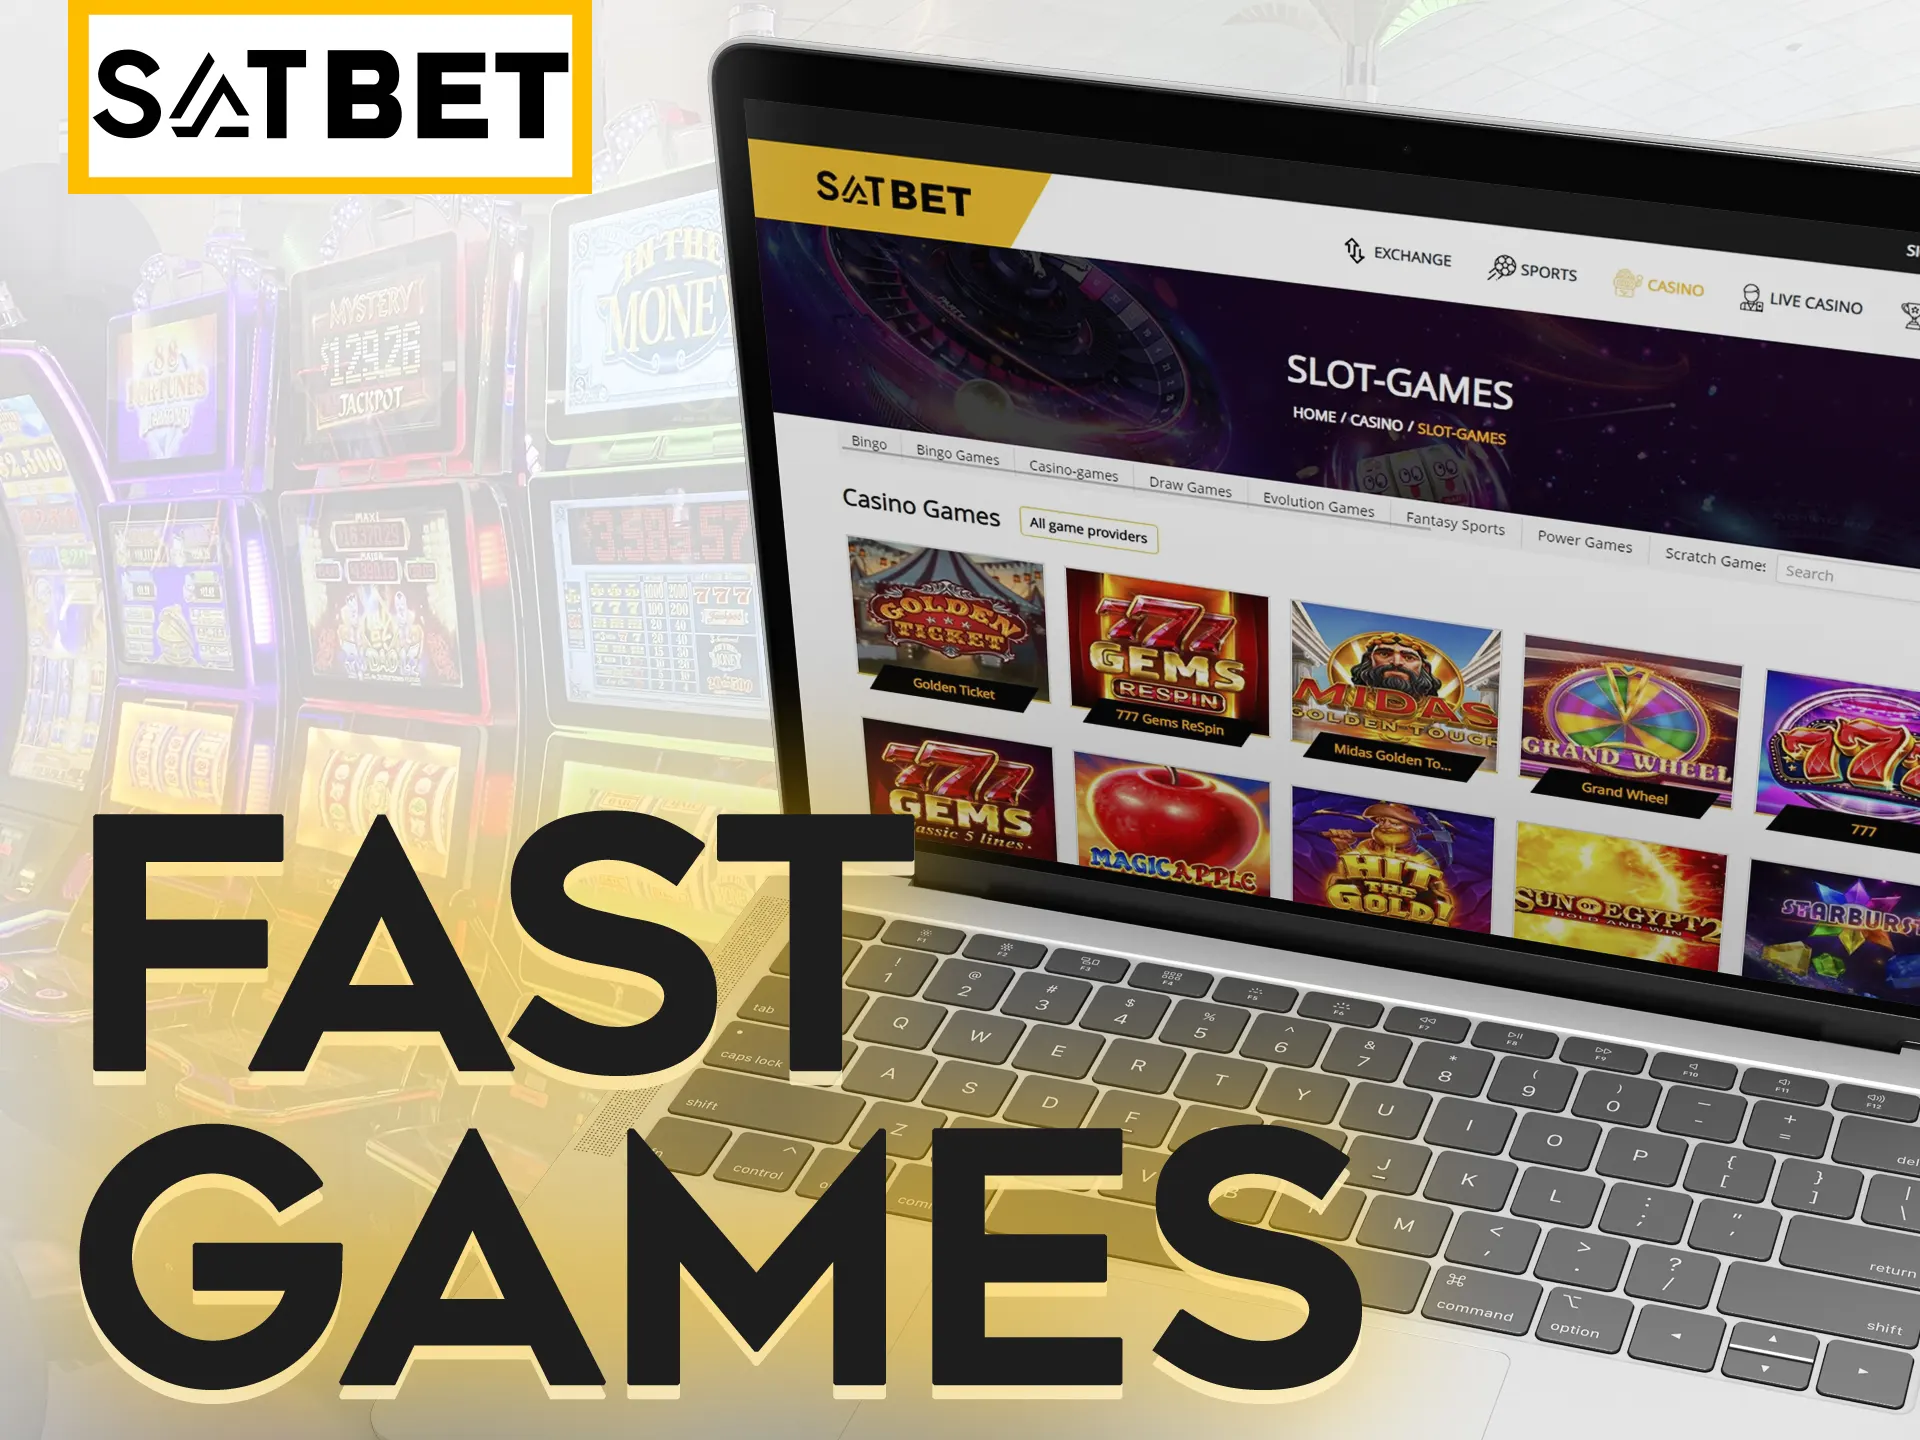 Play fast games on special Satbet page.